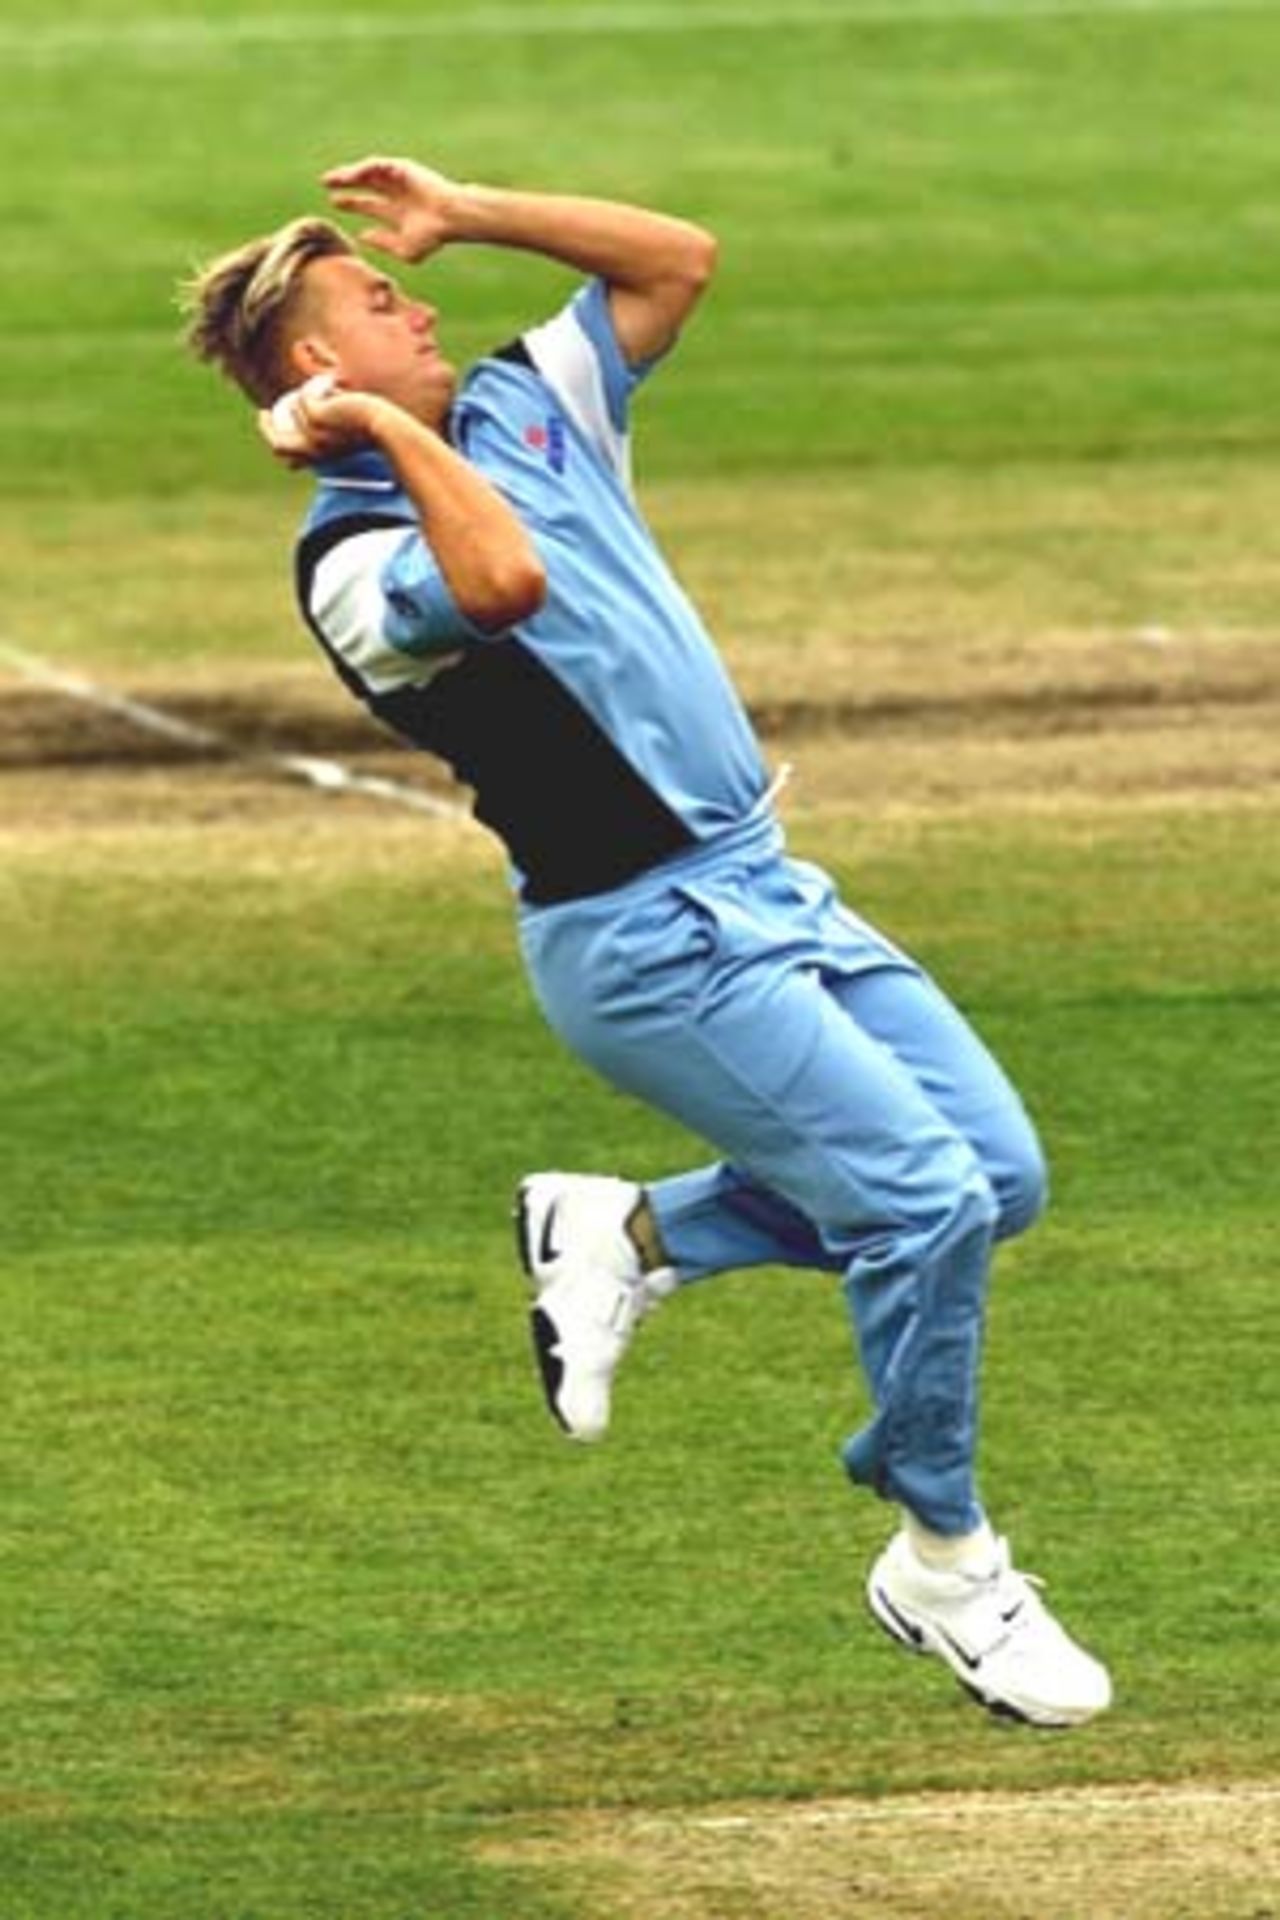 11 Nov 2000: Shane Lee from New South Wales in action during the Mercantile Mutual Cup Cricket match between Tasmania and New South Wales at Bellerive Oval in Hobart, Australia.